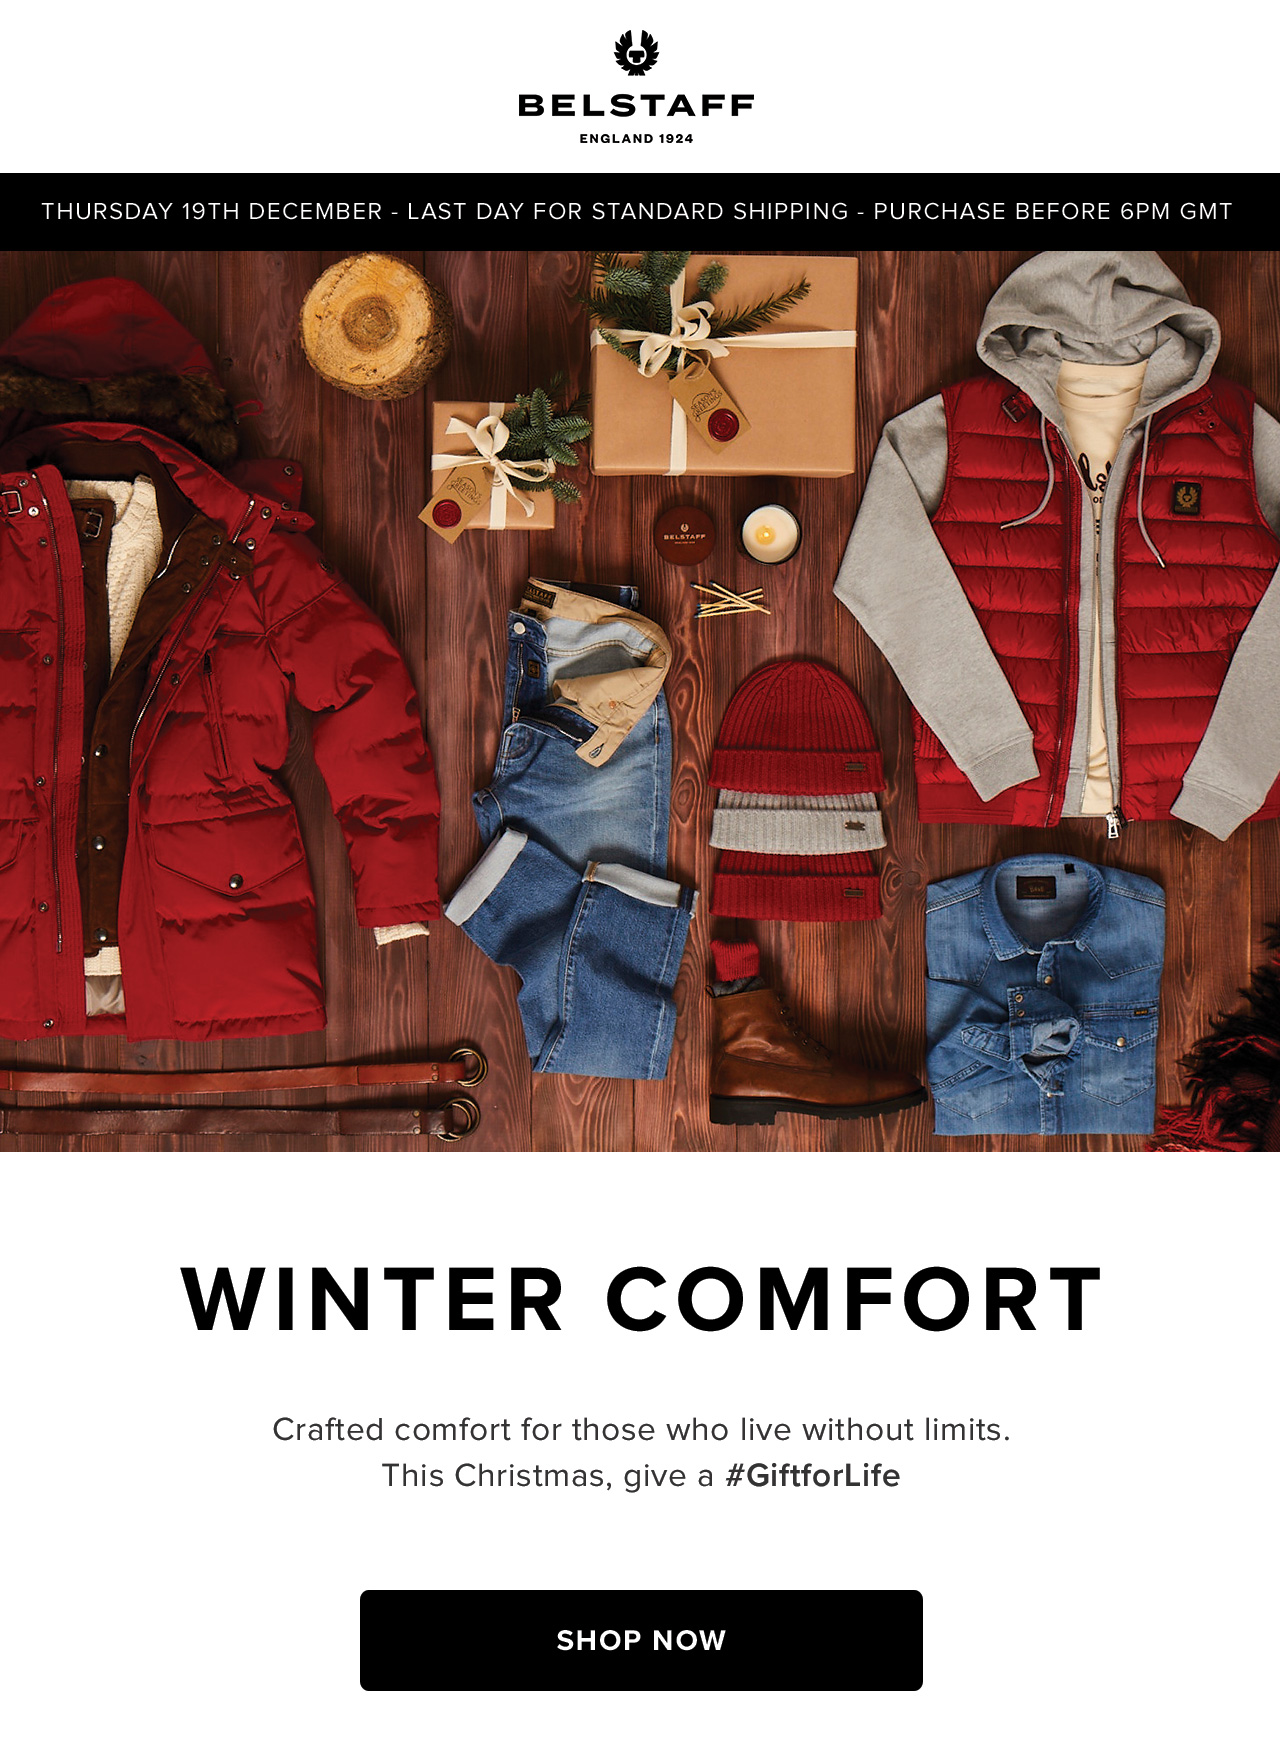 Crafted for comfort indoors or out. Wherever you're headed this Winter, give a #GiftforLife 